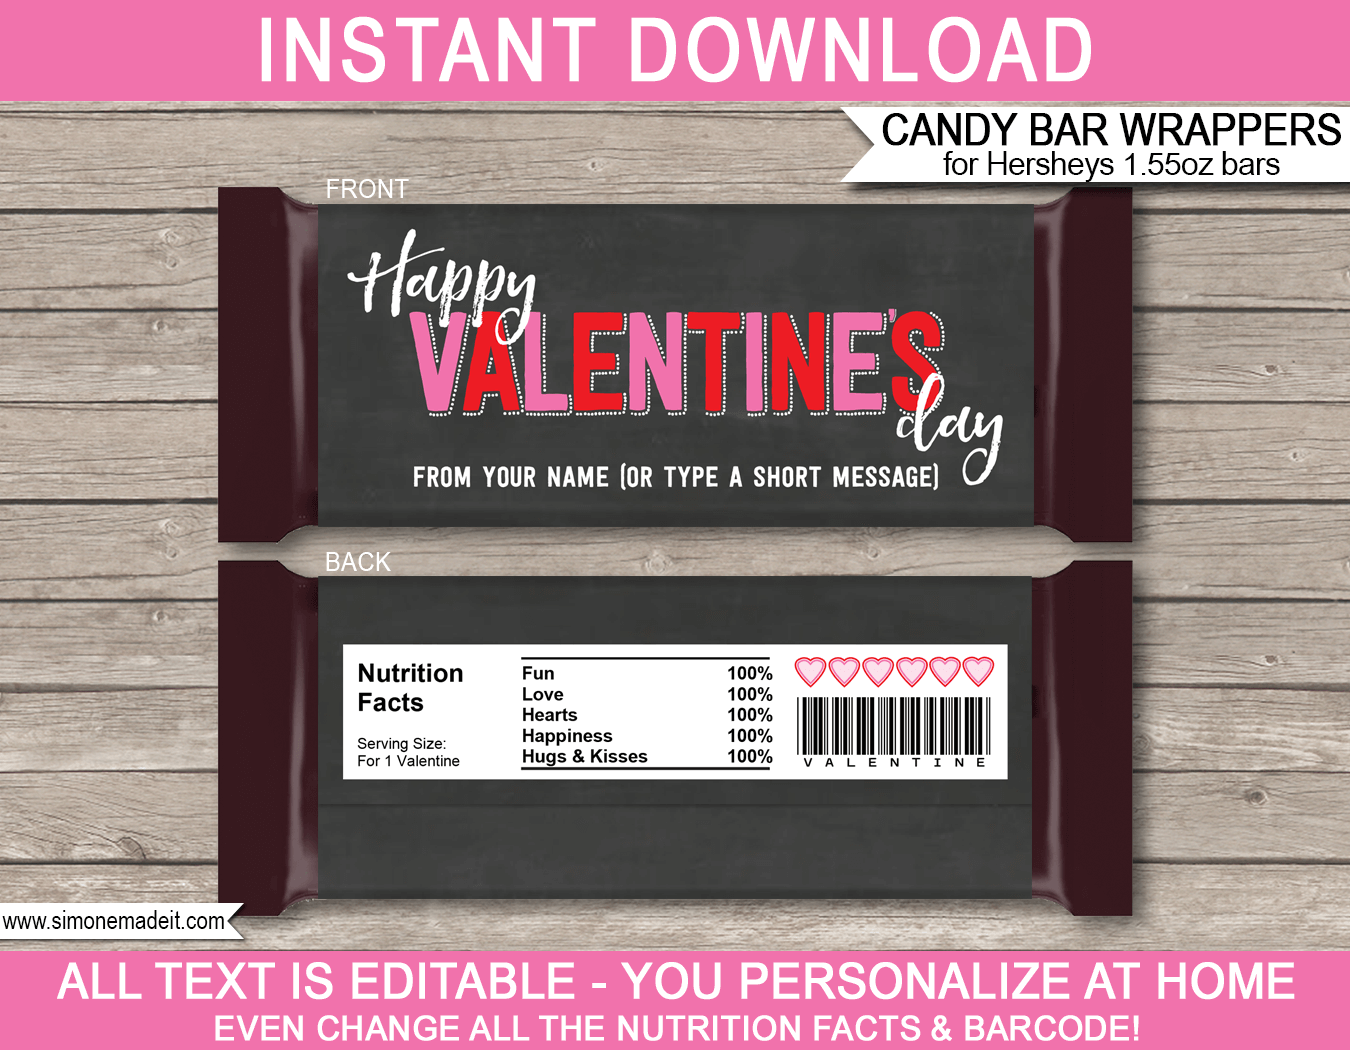 Valentine's Day Candy Bar Wrappers | Hershey 1.55oz Milk Chocolate Labels | Personalized Candy Bars | Editable Template | INSTANT DOWNLOAD $3.00 via simonemadeit.com